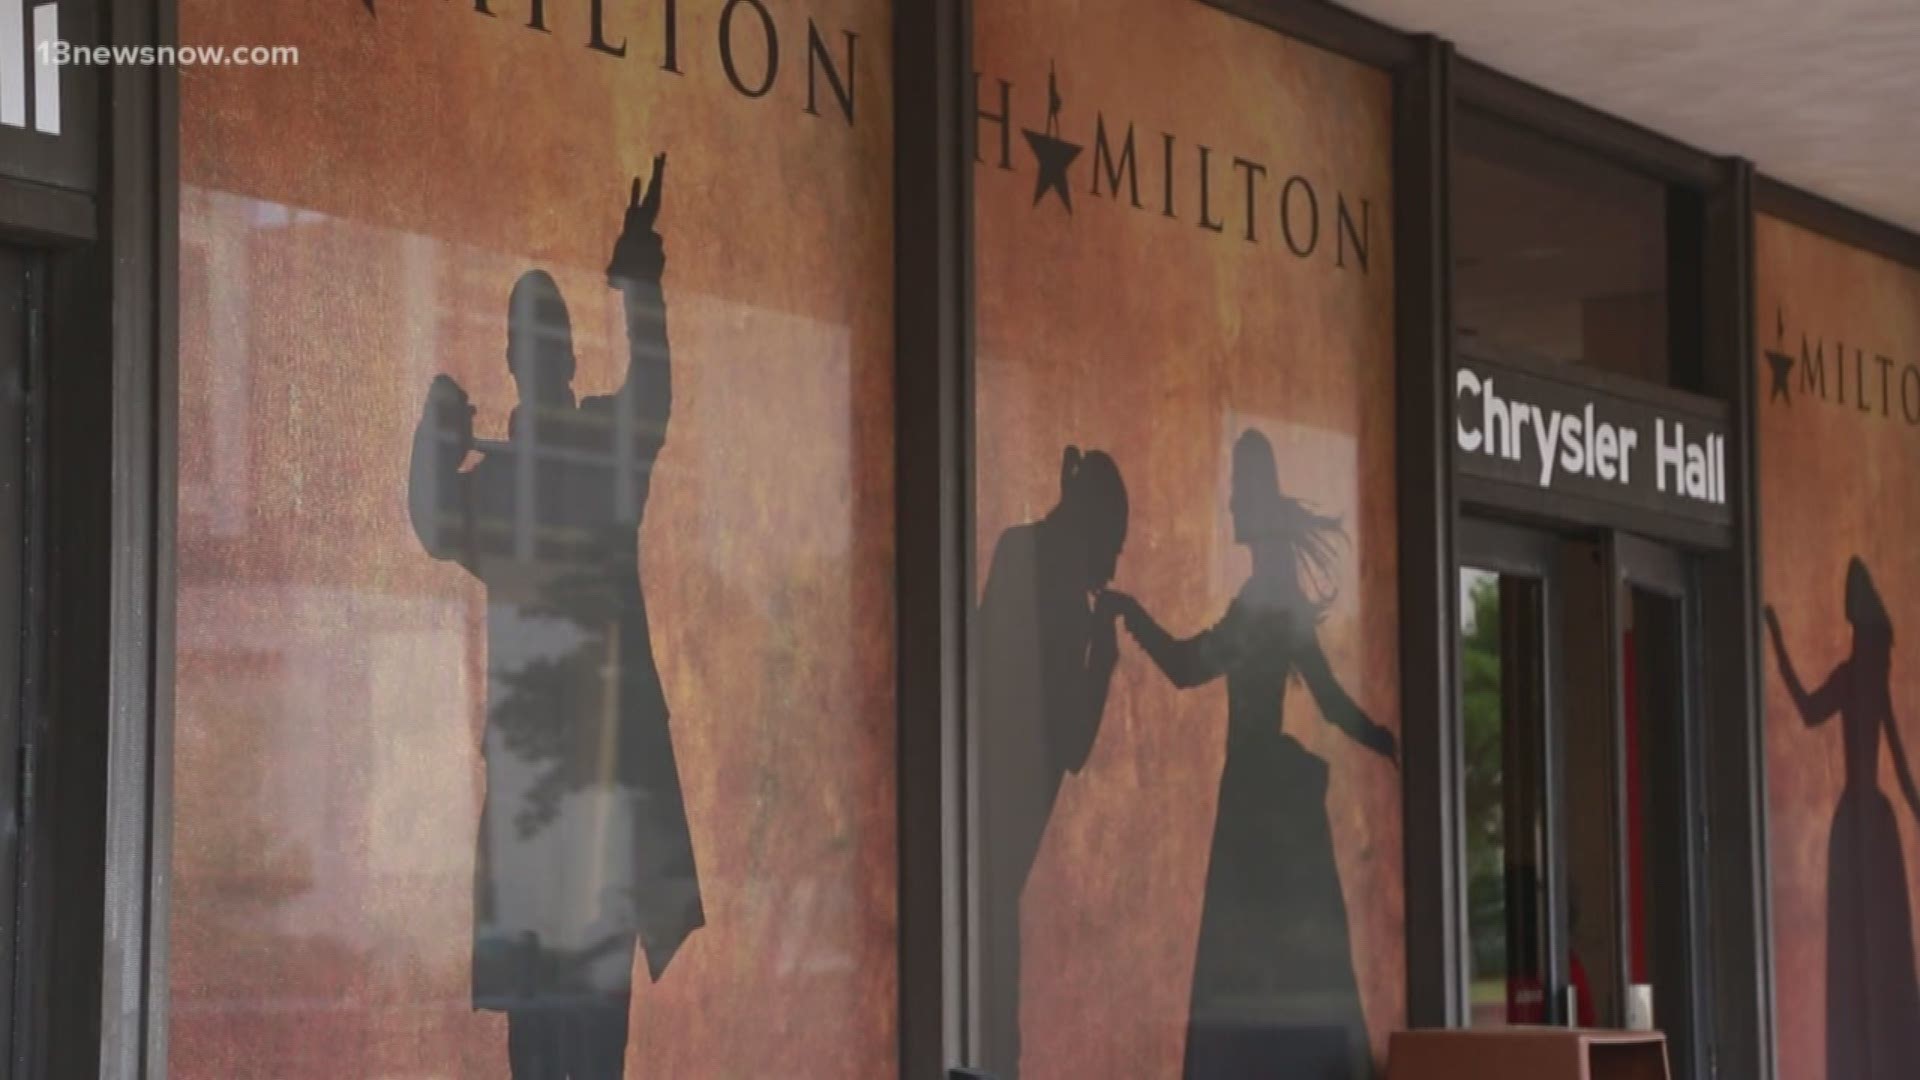 If you didn't get a Hamilton ticket Friday at Chrysler Hall, you might have to buy them online. Buying online can lead to scams so buyers should beware.